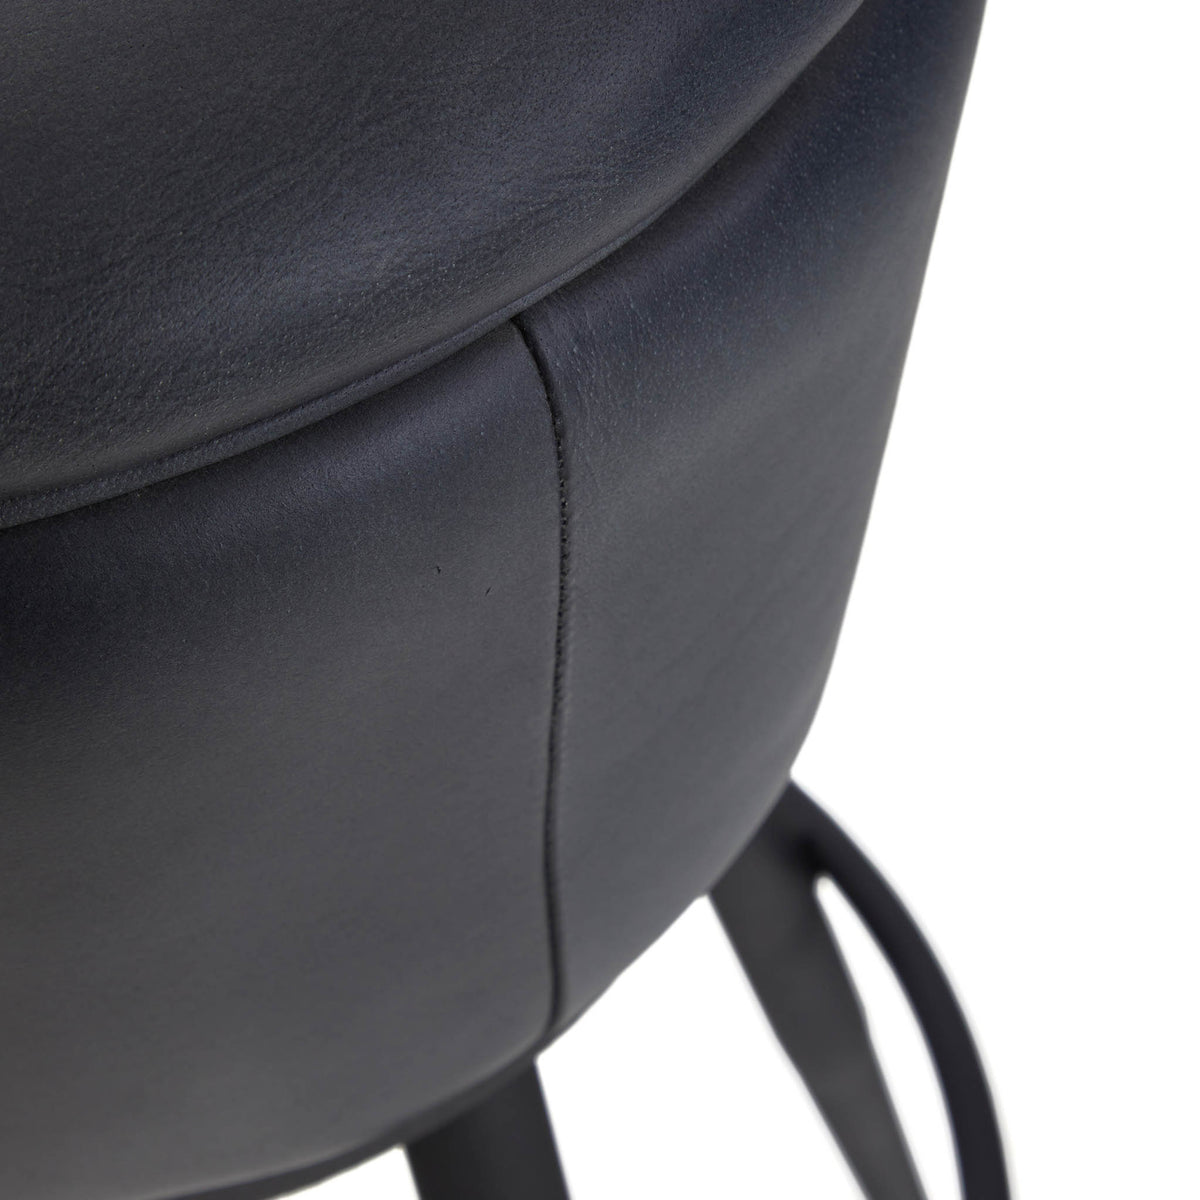 Manta Vintage Brown Round Leather Bar Stool close up of stitched leather